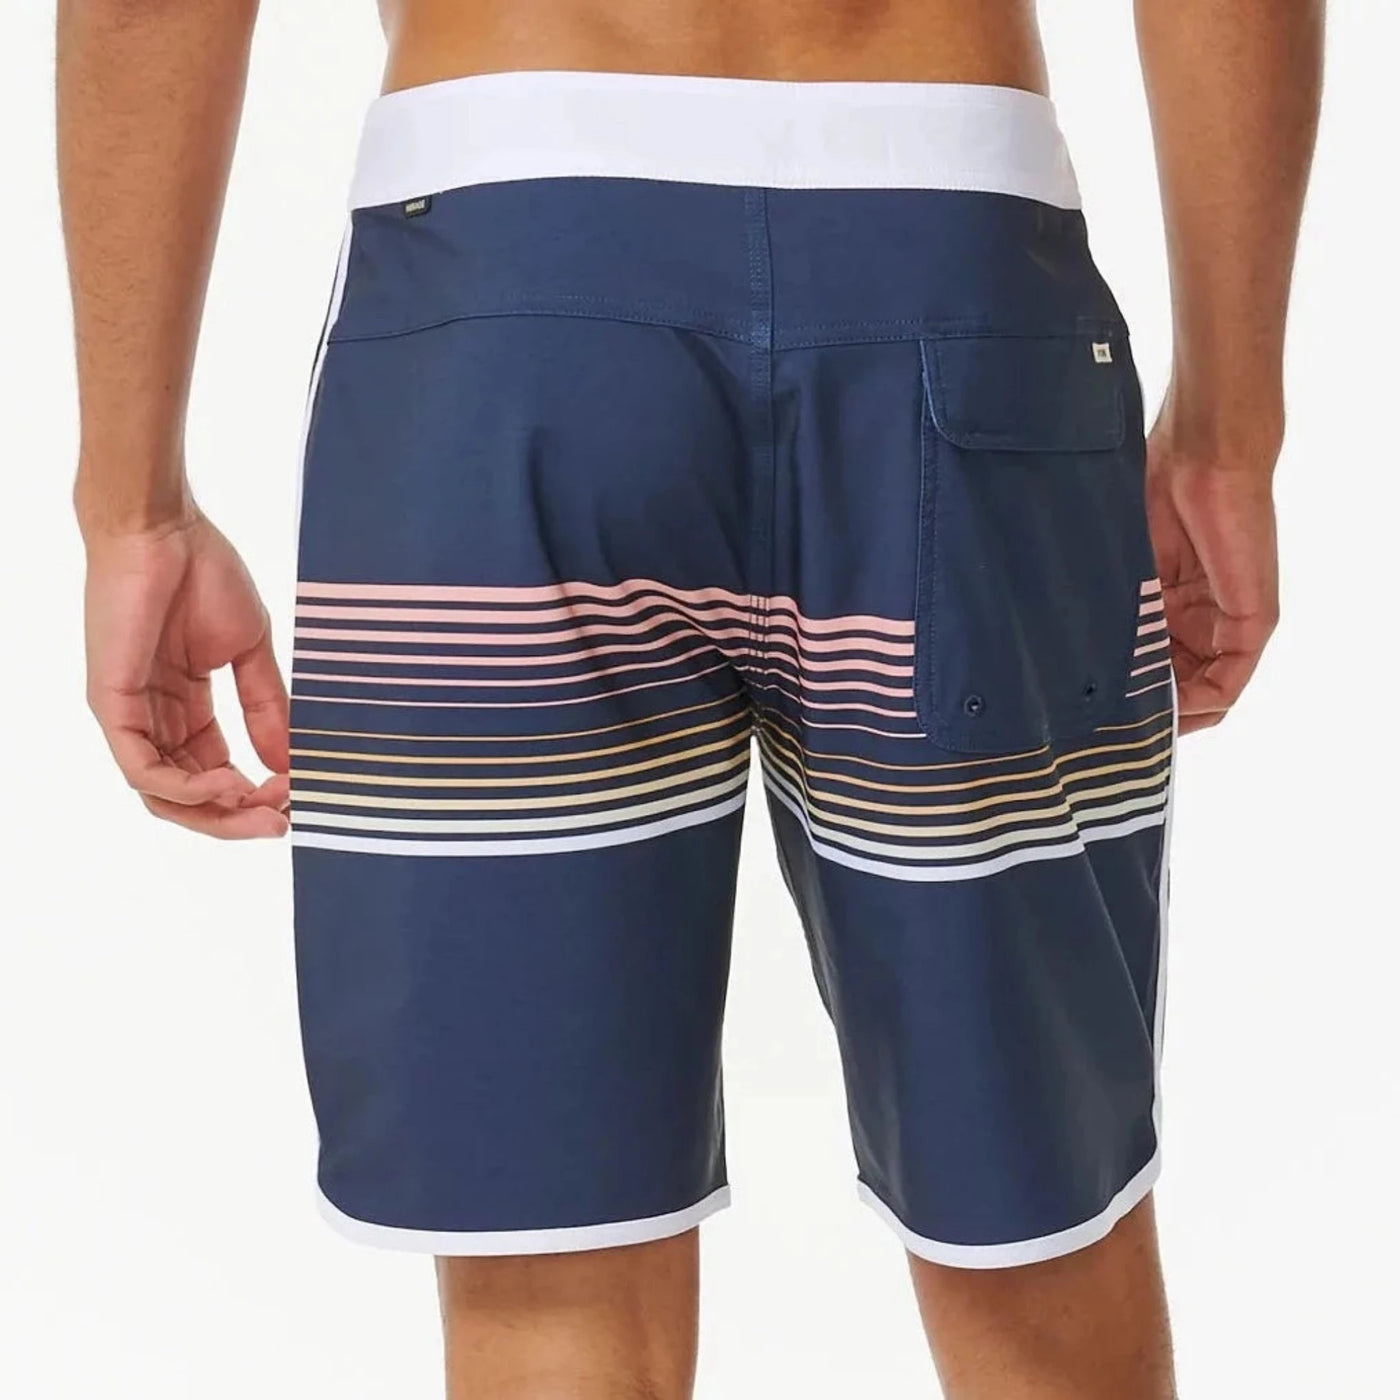 Rip Curl Mirage Surf Revival Boardshorts